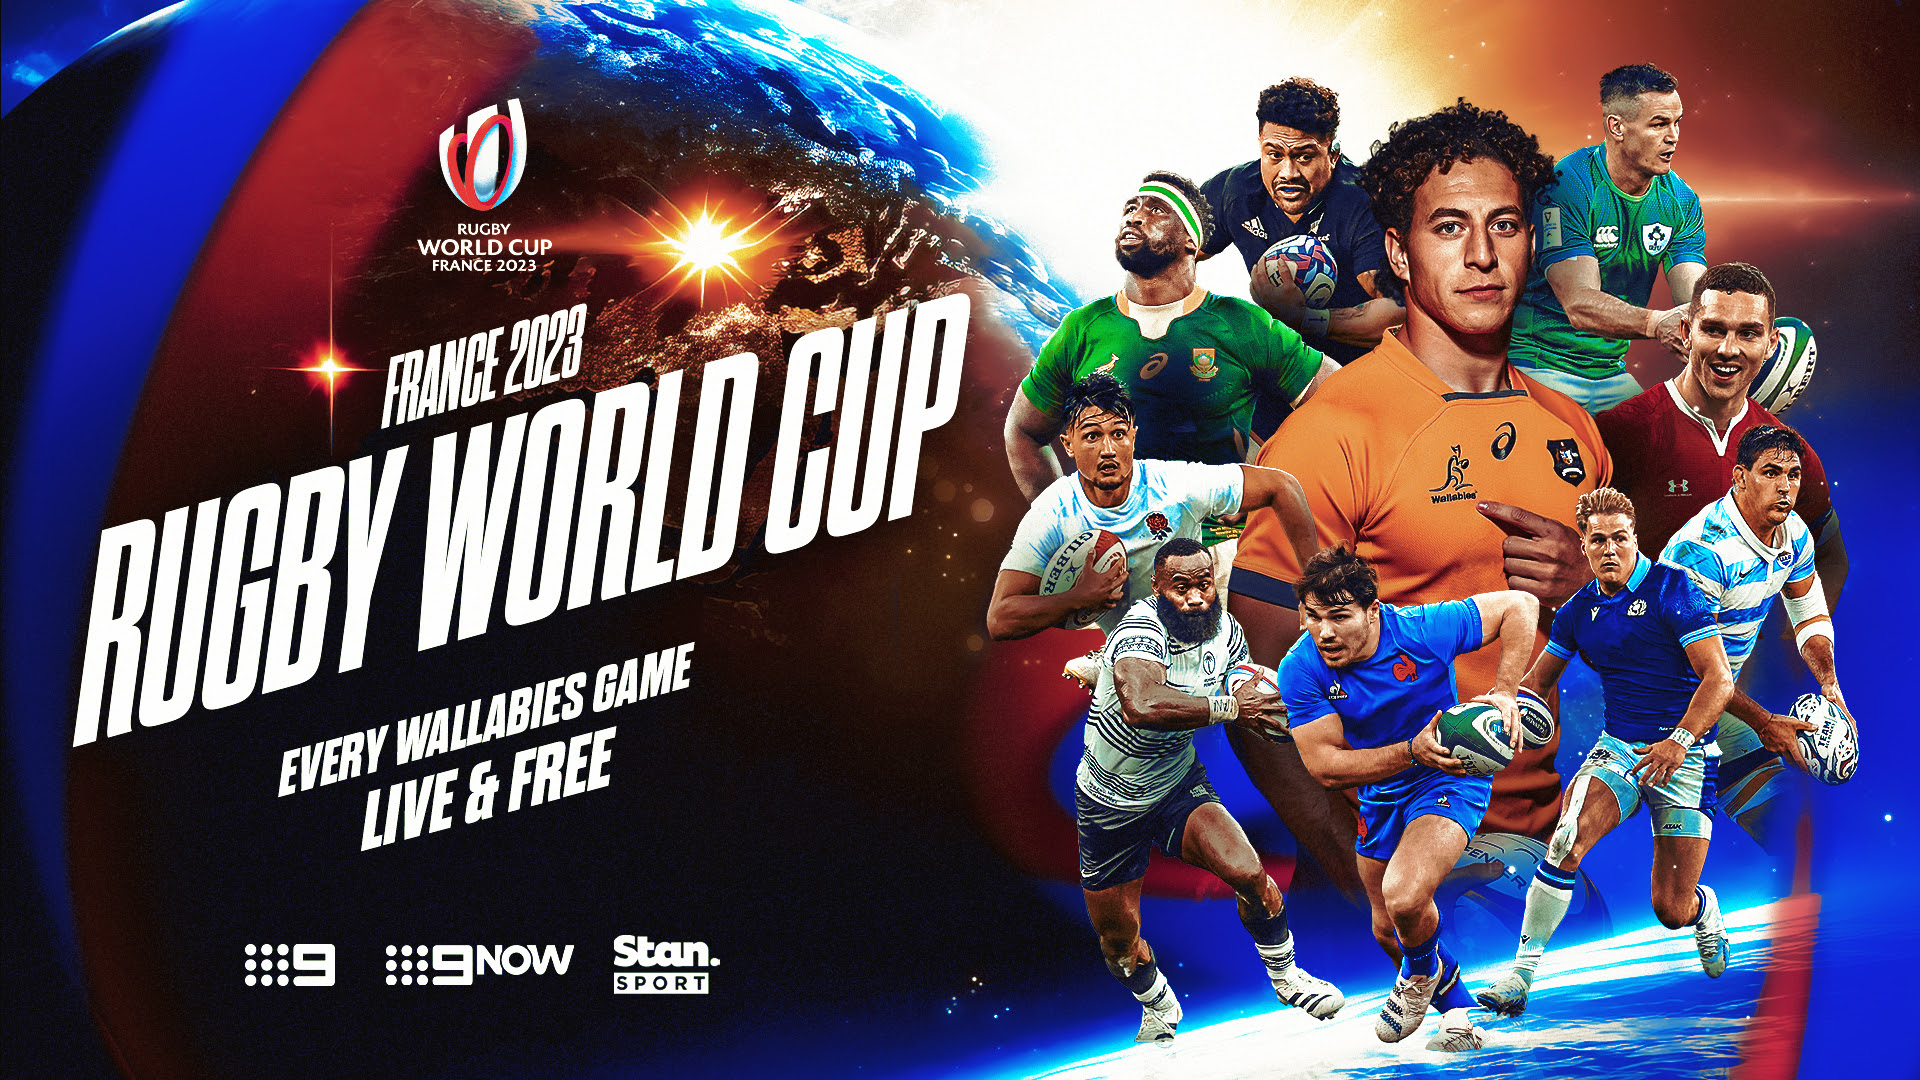 Every Wallabies game for free in Rugby World Cup on Channel 9HD